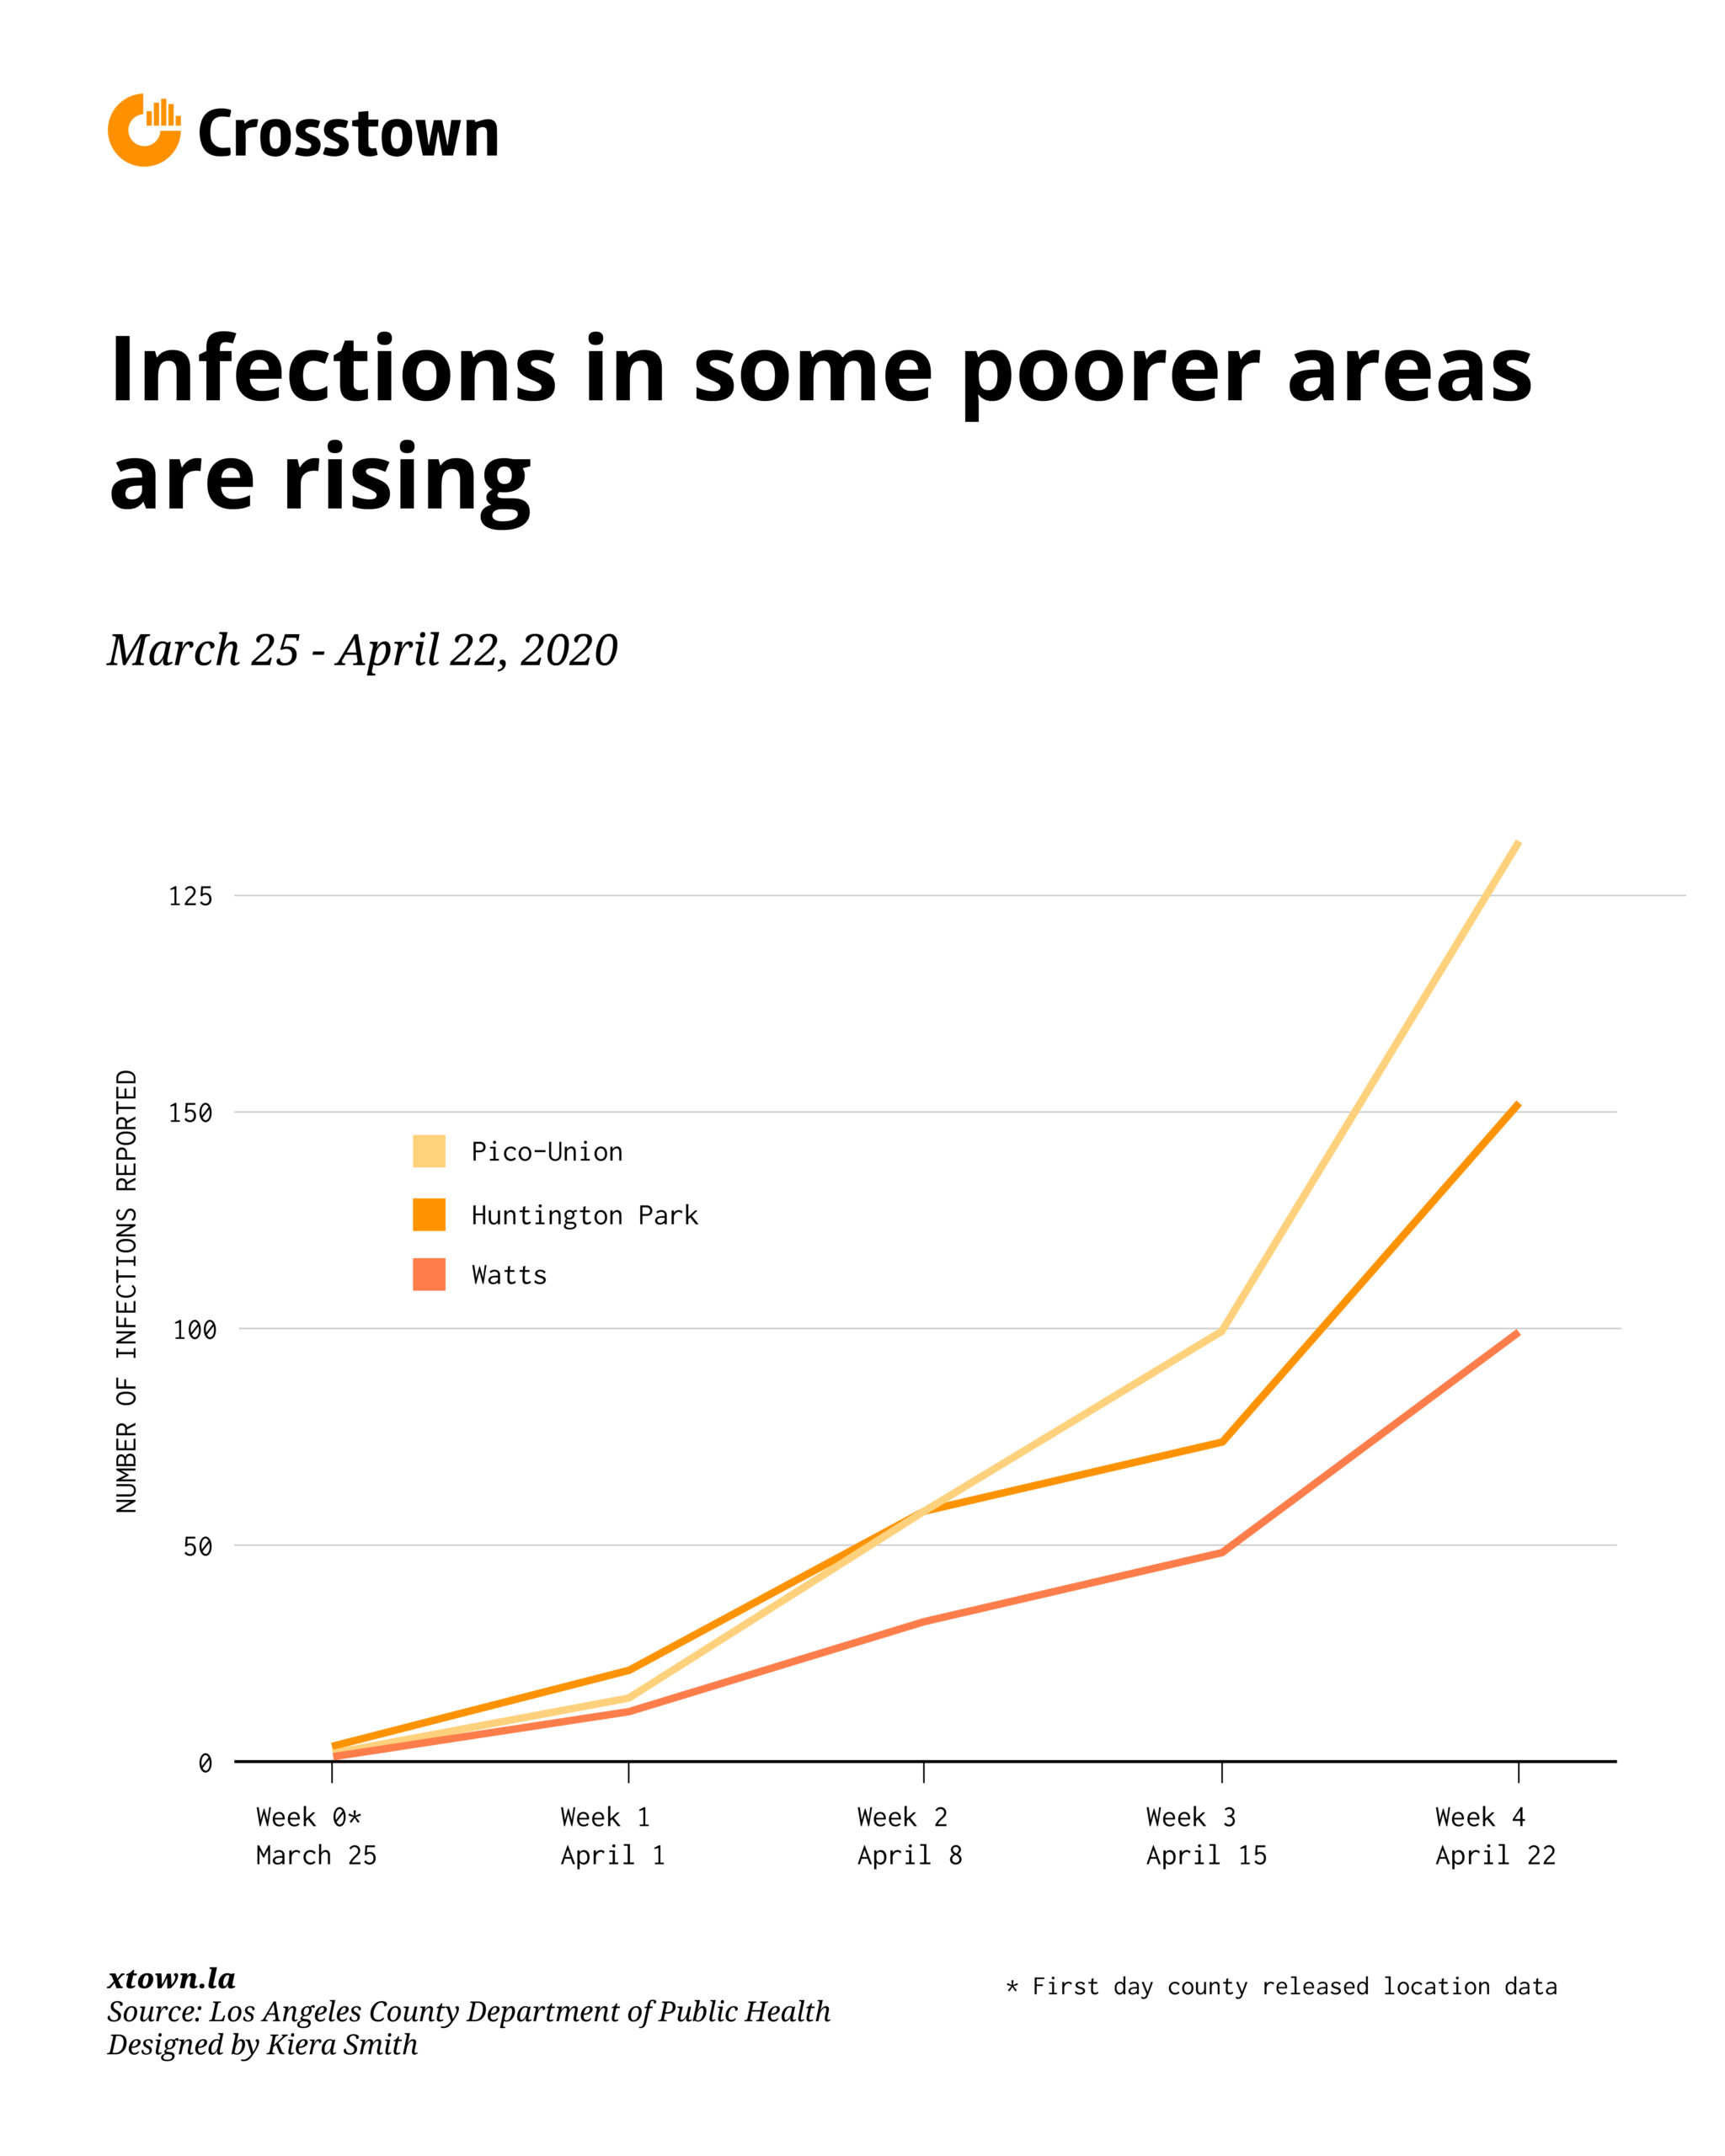 Poorer areas in Los Angeles have rising infection rates 